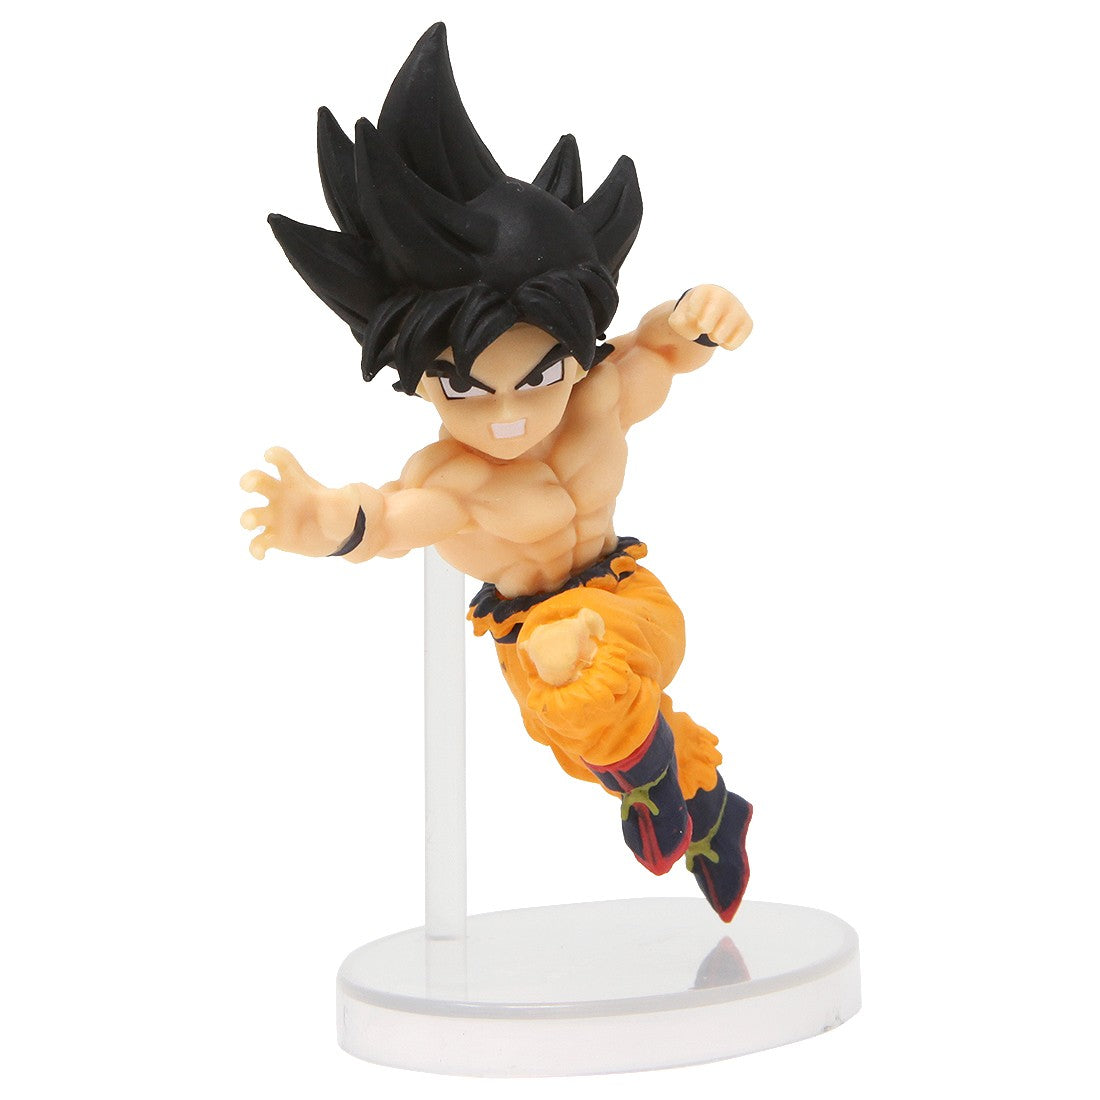 Candy Toy: Dragon Ball - Adverge Motion 3